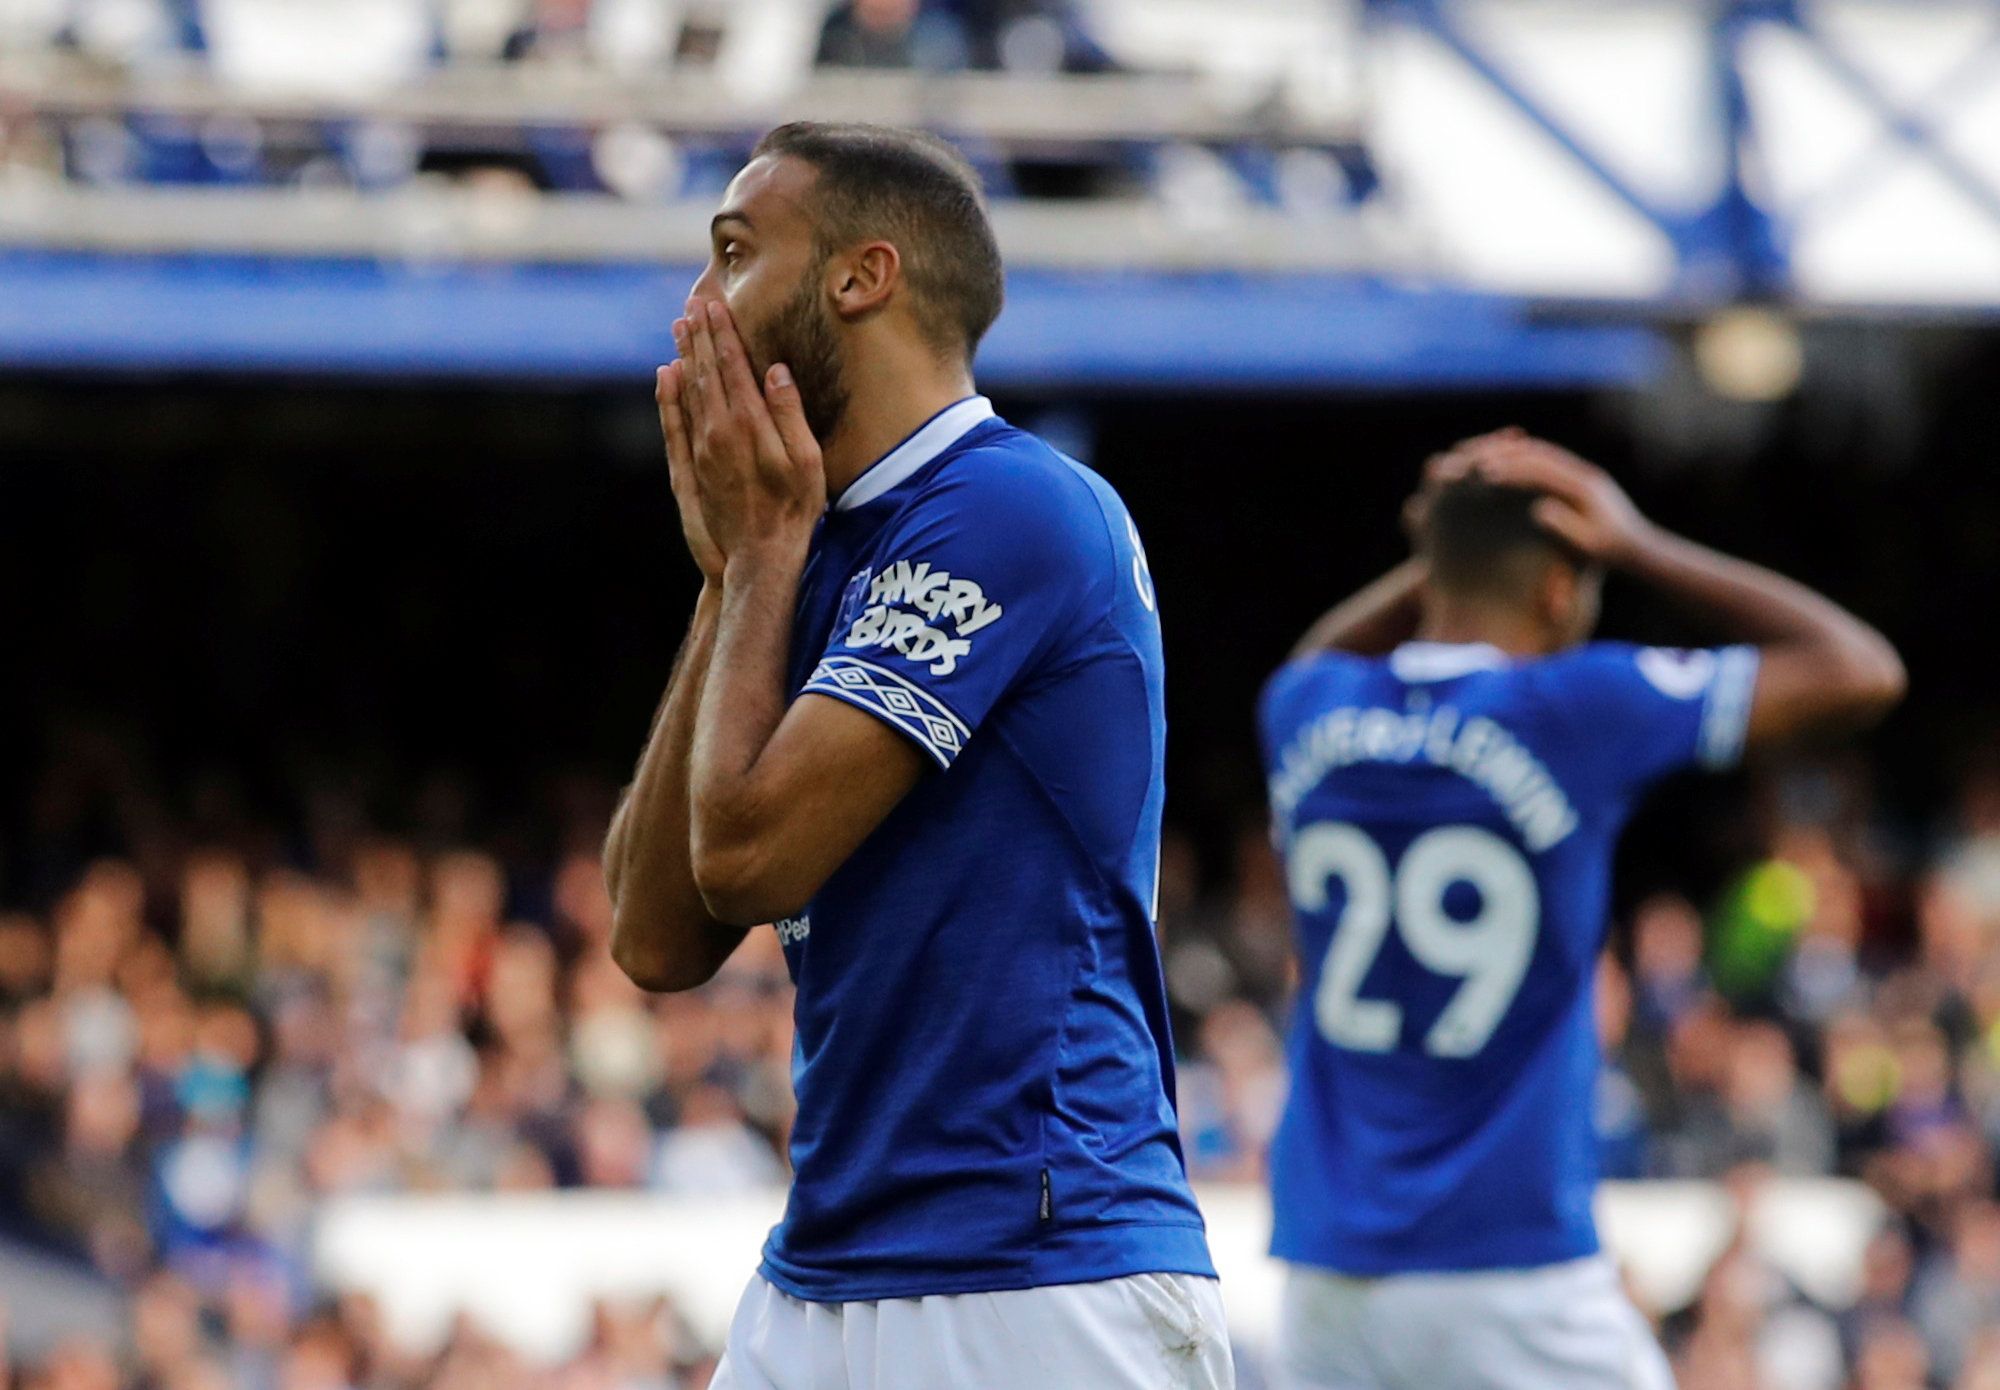 Soccer Football - Premier League - Everton v West Ham United - Goodison Park, Liverpool, Britain - September 16, 2018  Everton's Cenk Tosun reacts after a missed chance  REUTERS/Phil Noble  EDITORIAL USE ONLY. No use with unauthorized audio, video, data, fixture lists, club/league logos or 